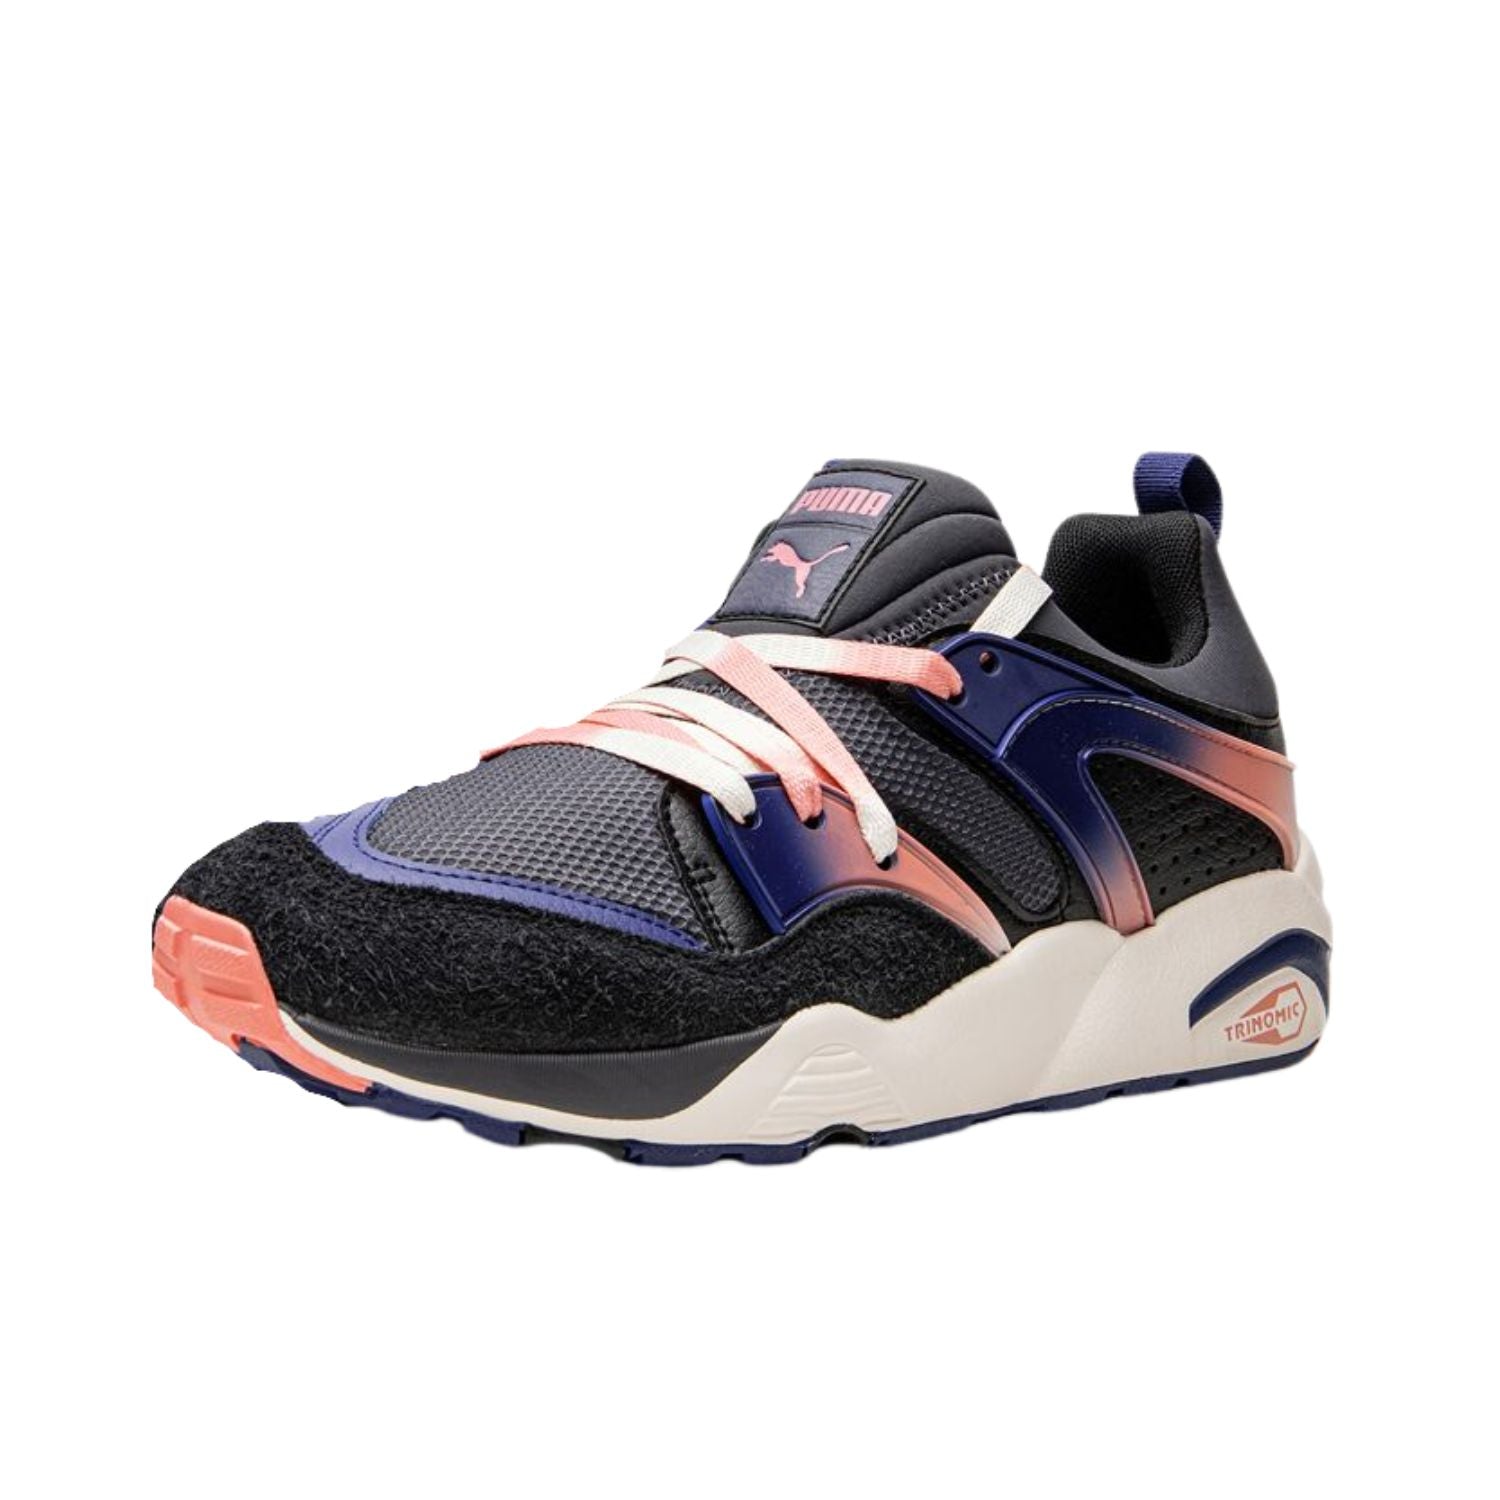 Puma Blaze Of Glory Psychedelics Mens Style : 387576-02